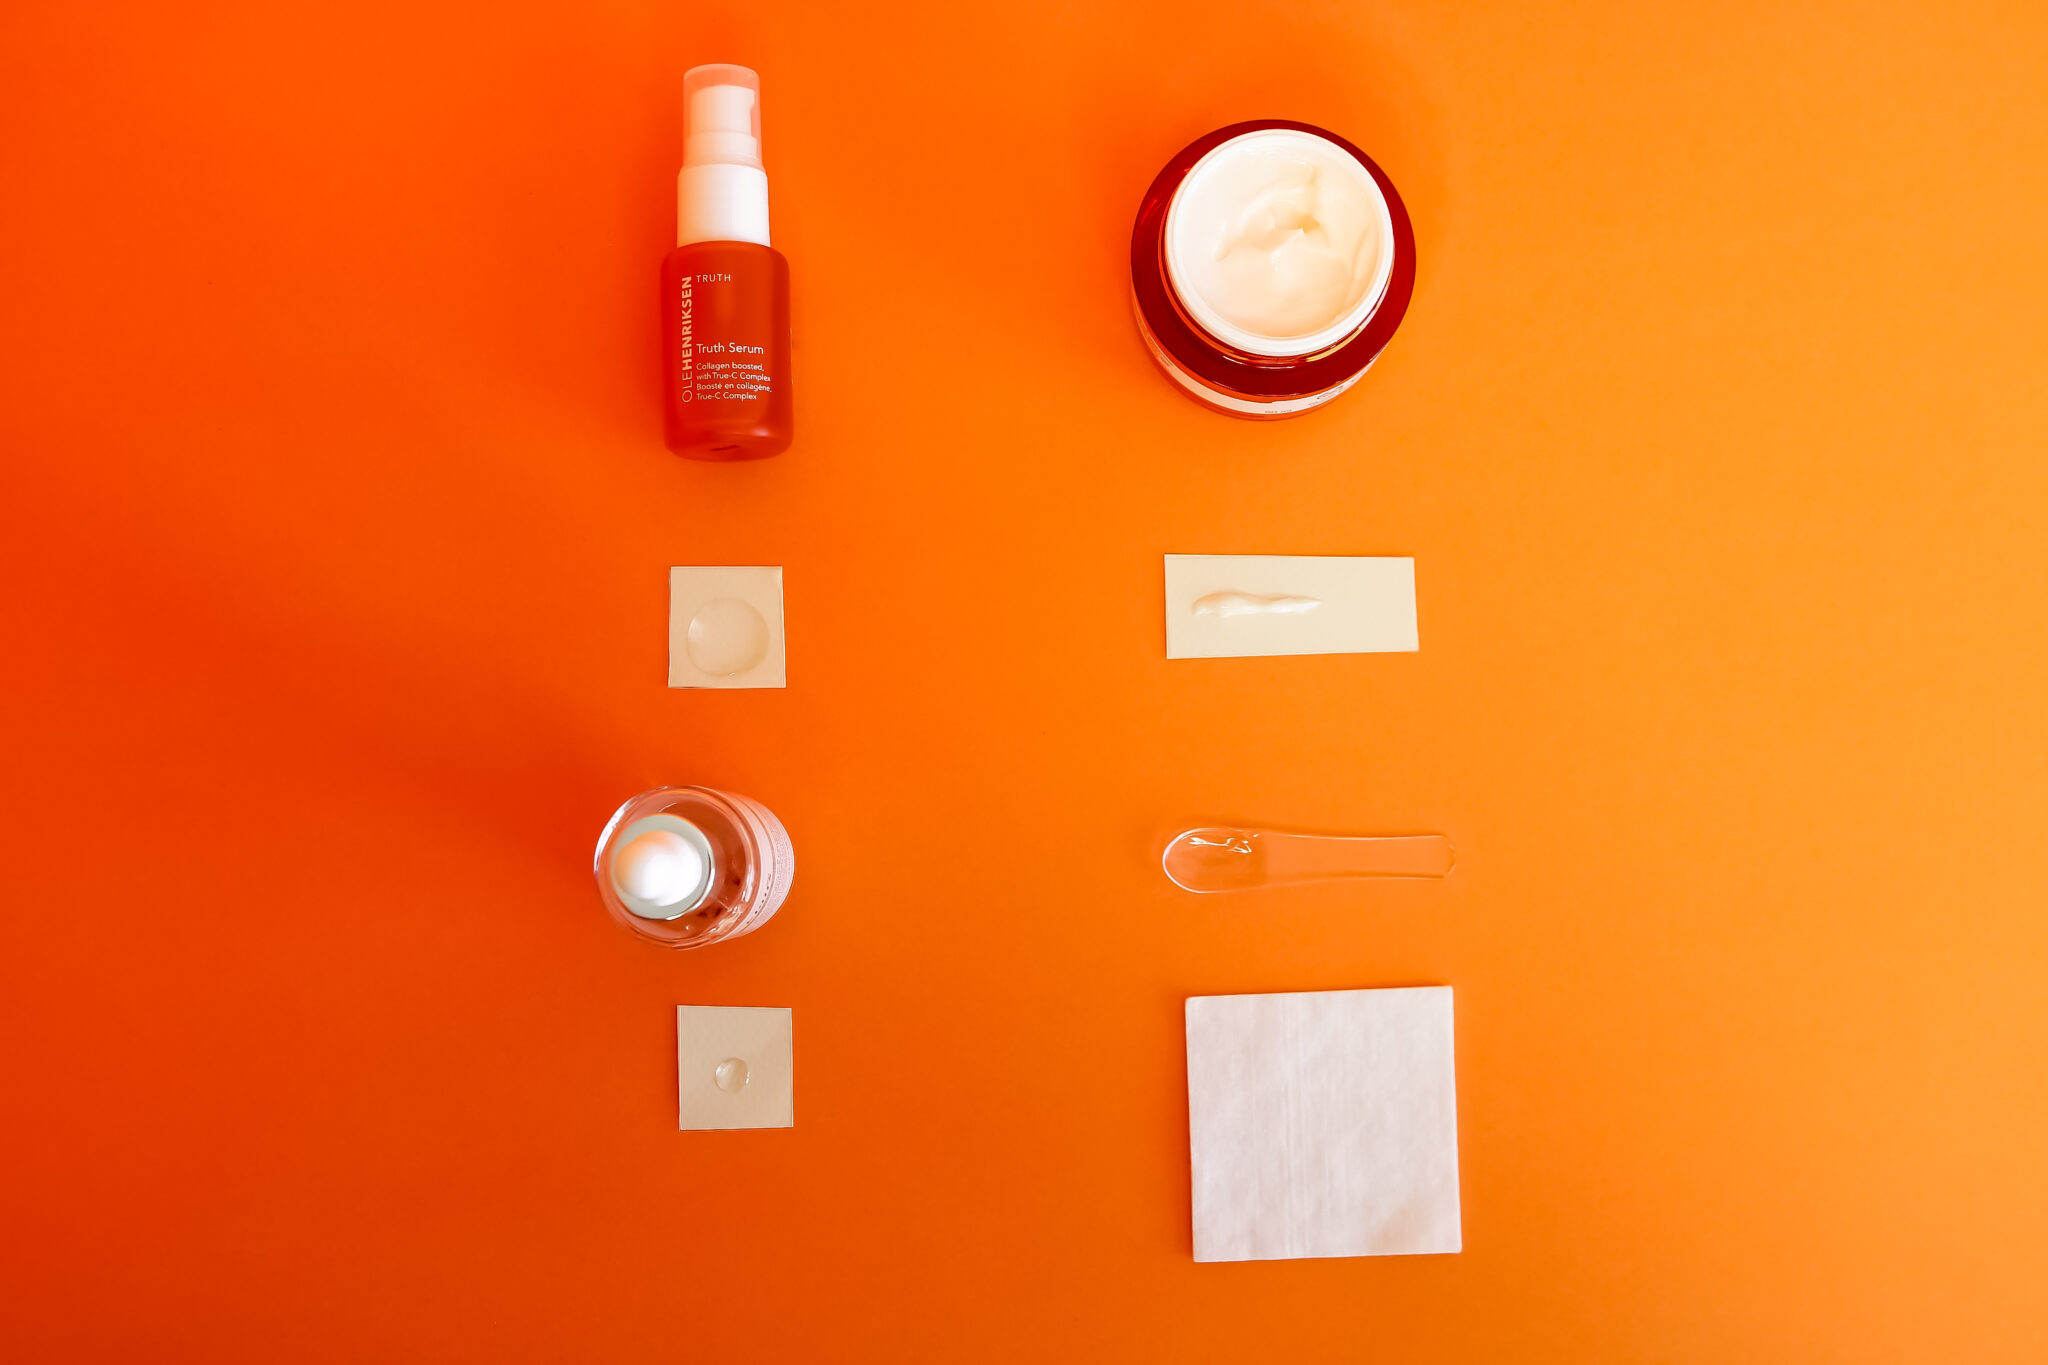 Tonal flat lay photograph of 3 skincare products and an orange against a solid orange coloured background.